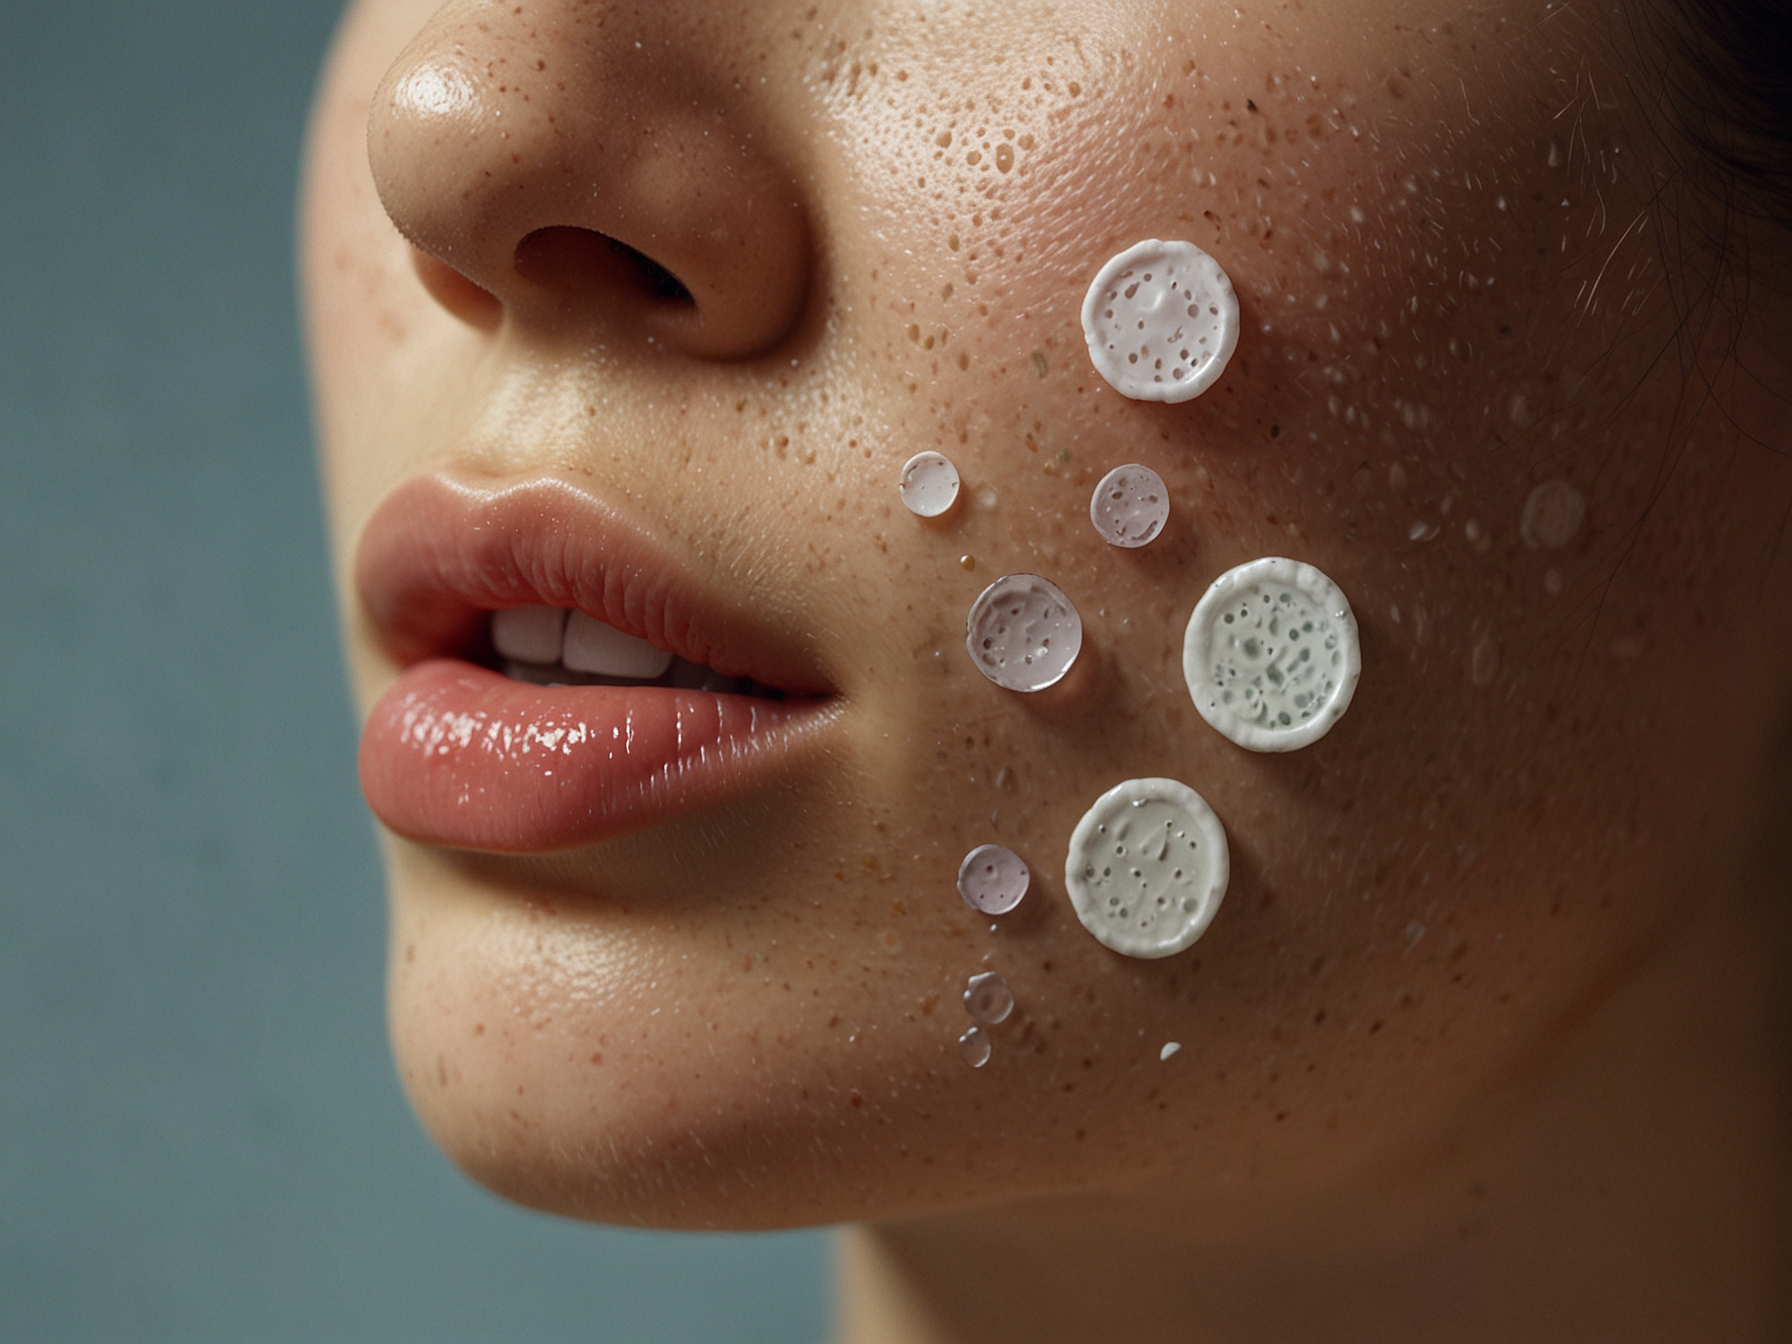 A close-up of different types of pimple patches, including some infused with salicylic acid or tea tree oil, showing their diverse options and functionalities in combating acne.